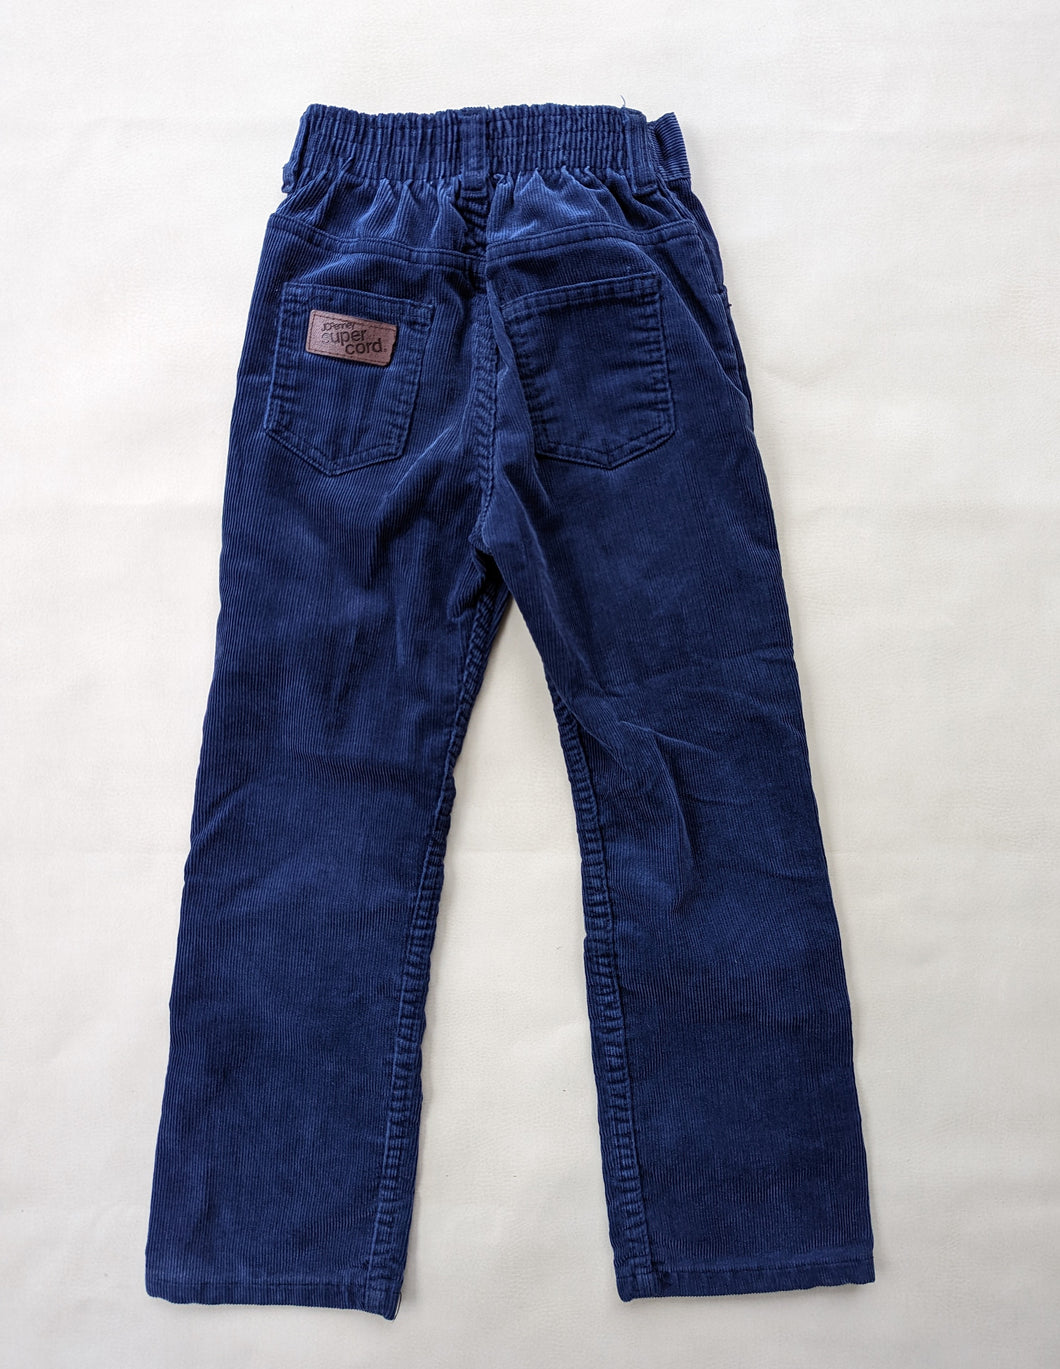 JCPenney Navy Corduroy Pants 6-7y